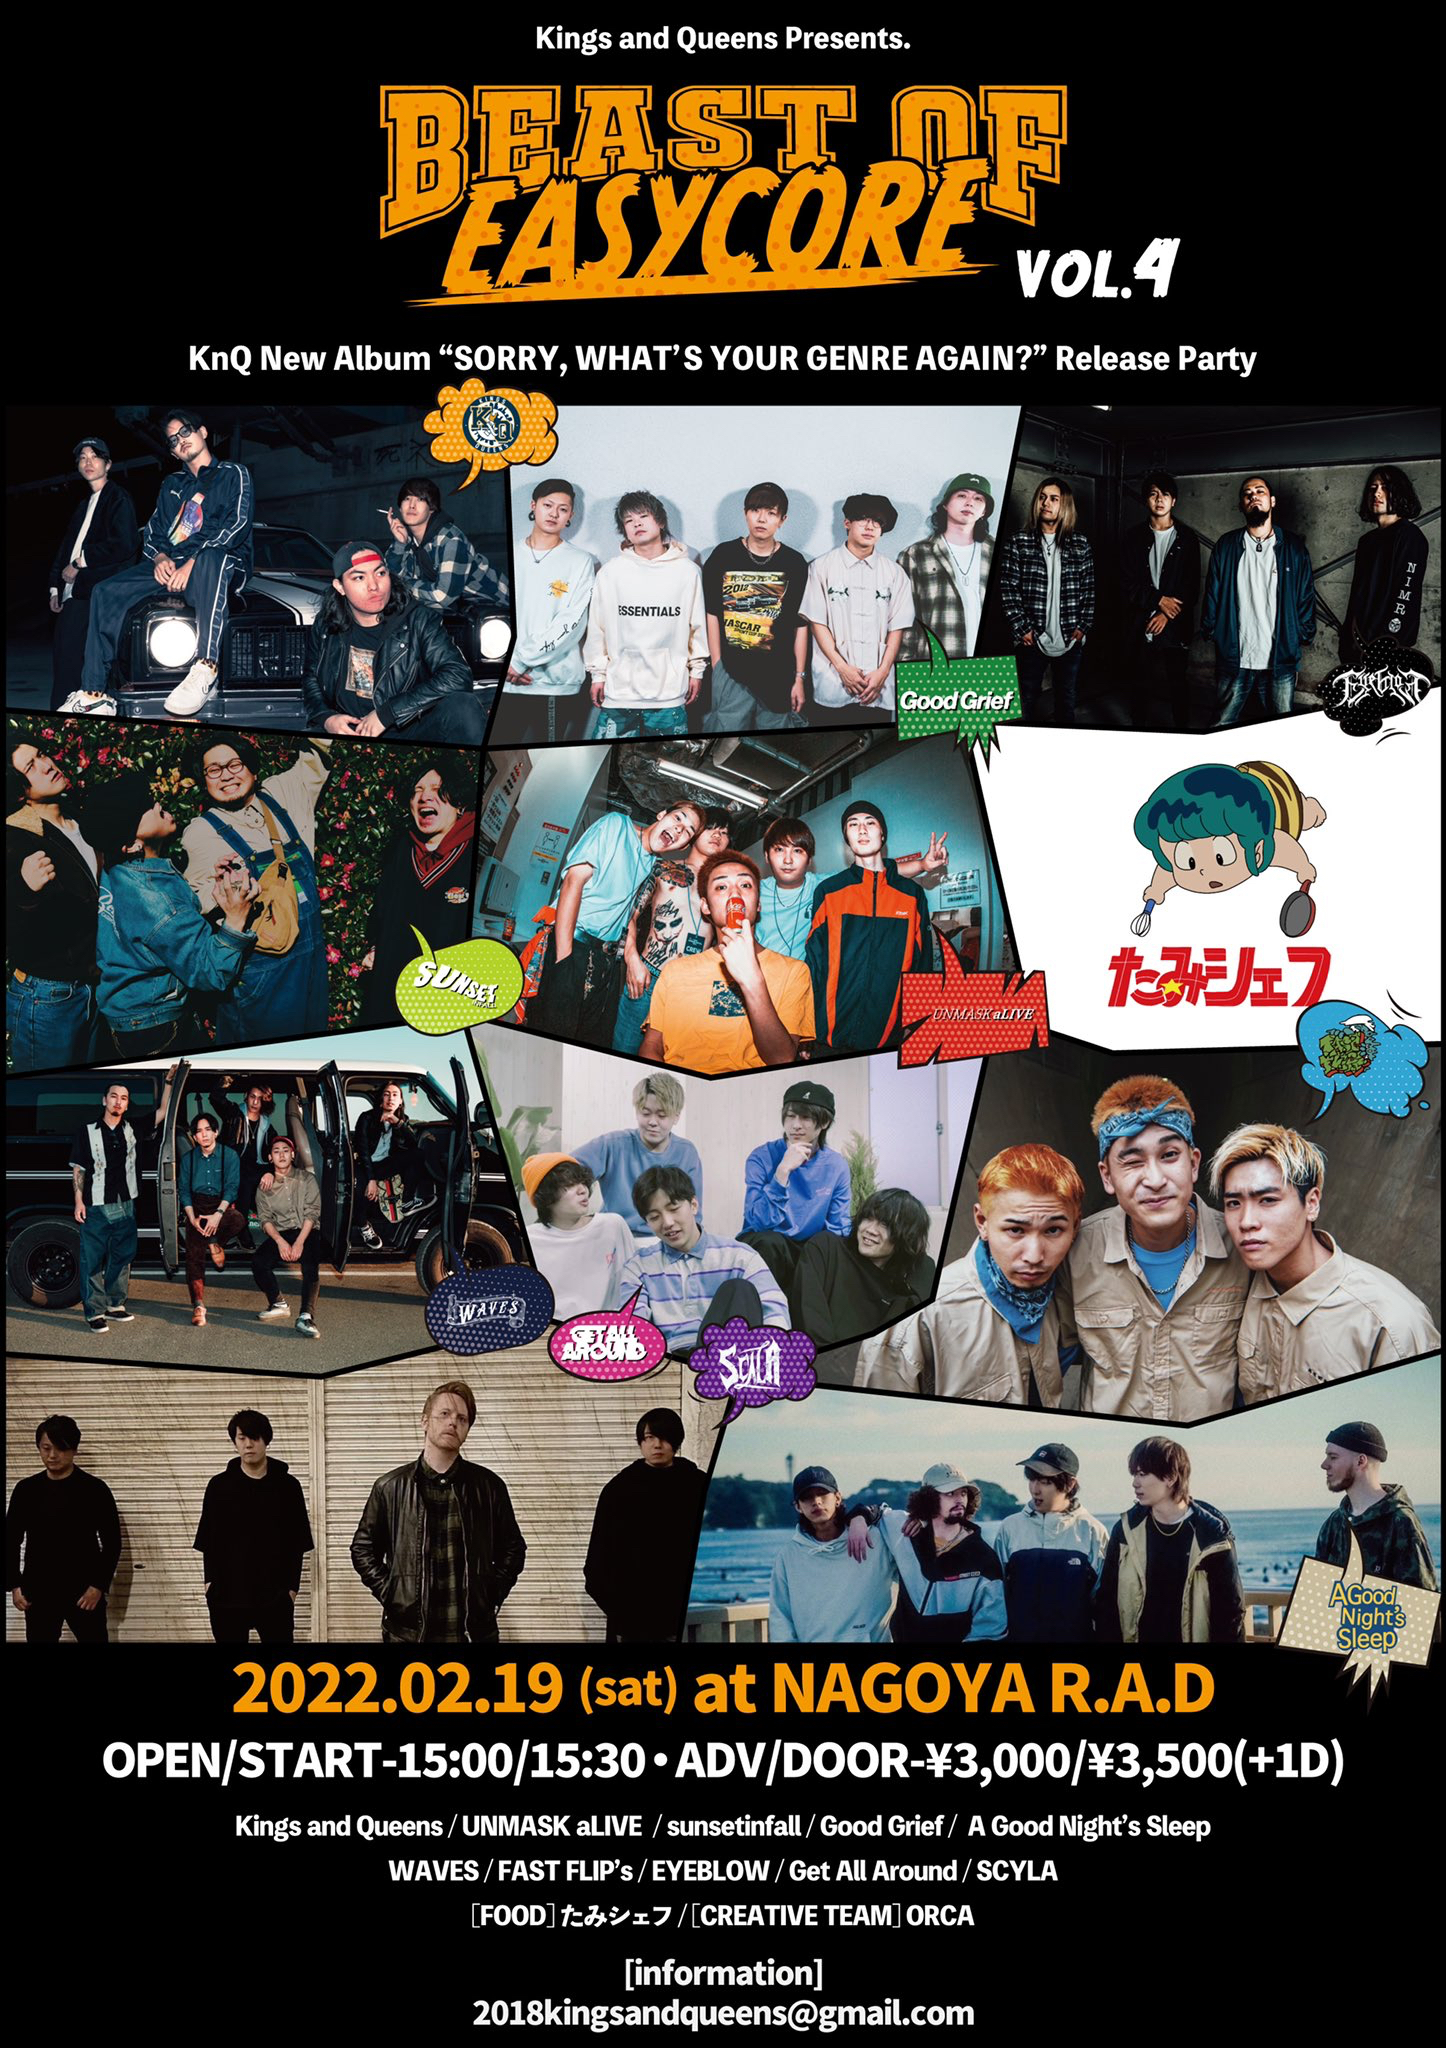 Kings and Queens Pre. “BEAST OF EASYCORE Vol.4” ~KnQ New Album Release Party~